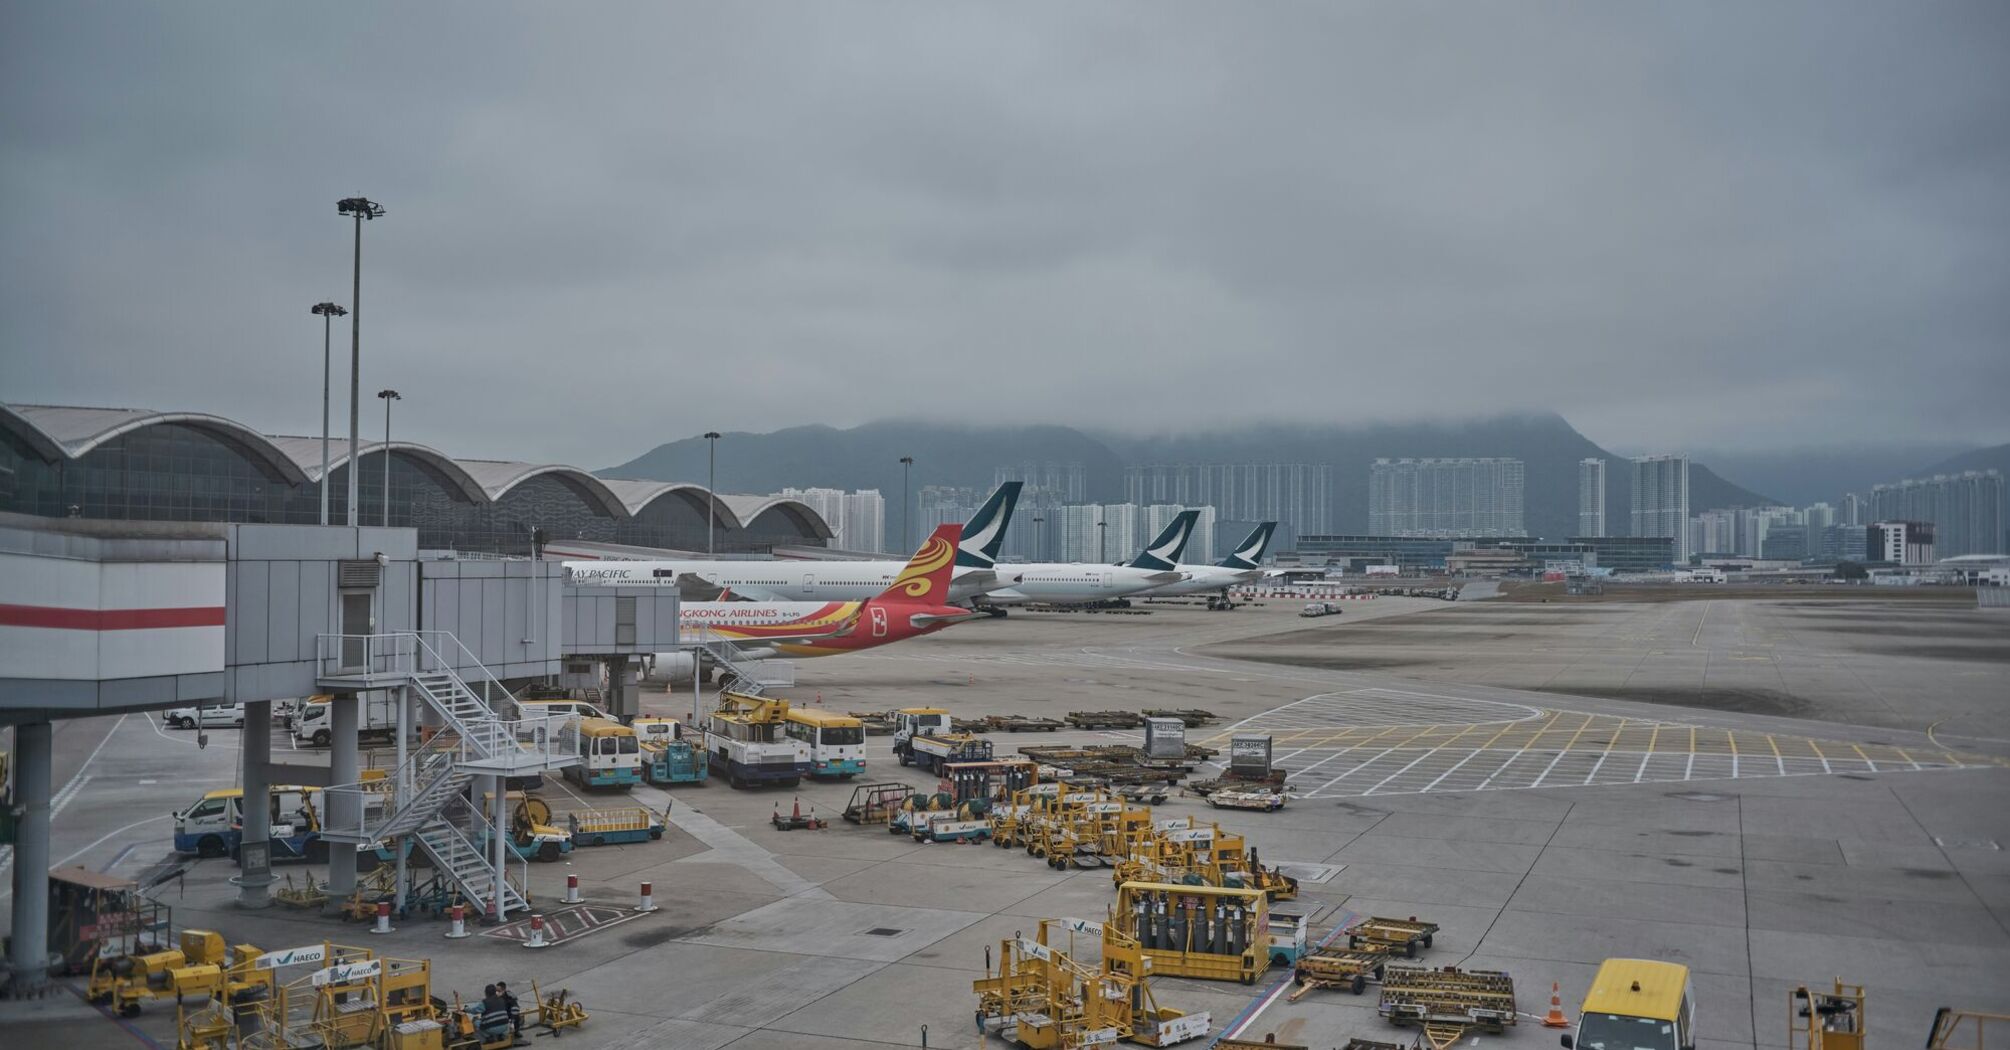 Hong Kong International Airport with active tarmac, aircraft, and cargo vehicles on a cloudy day 